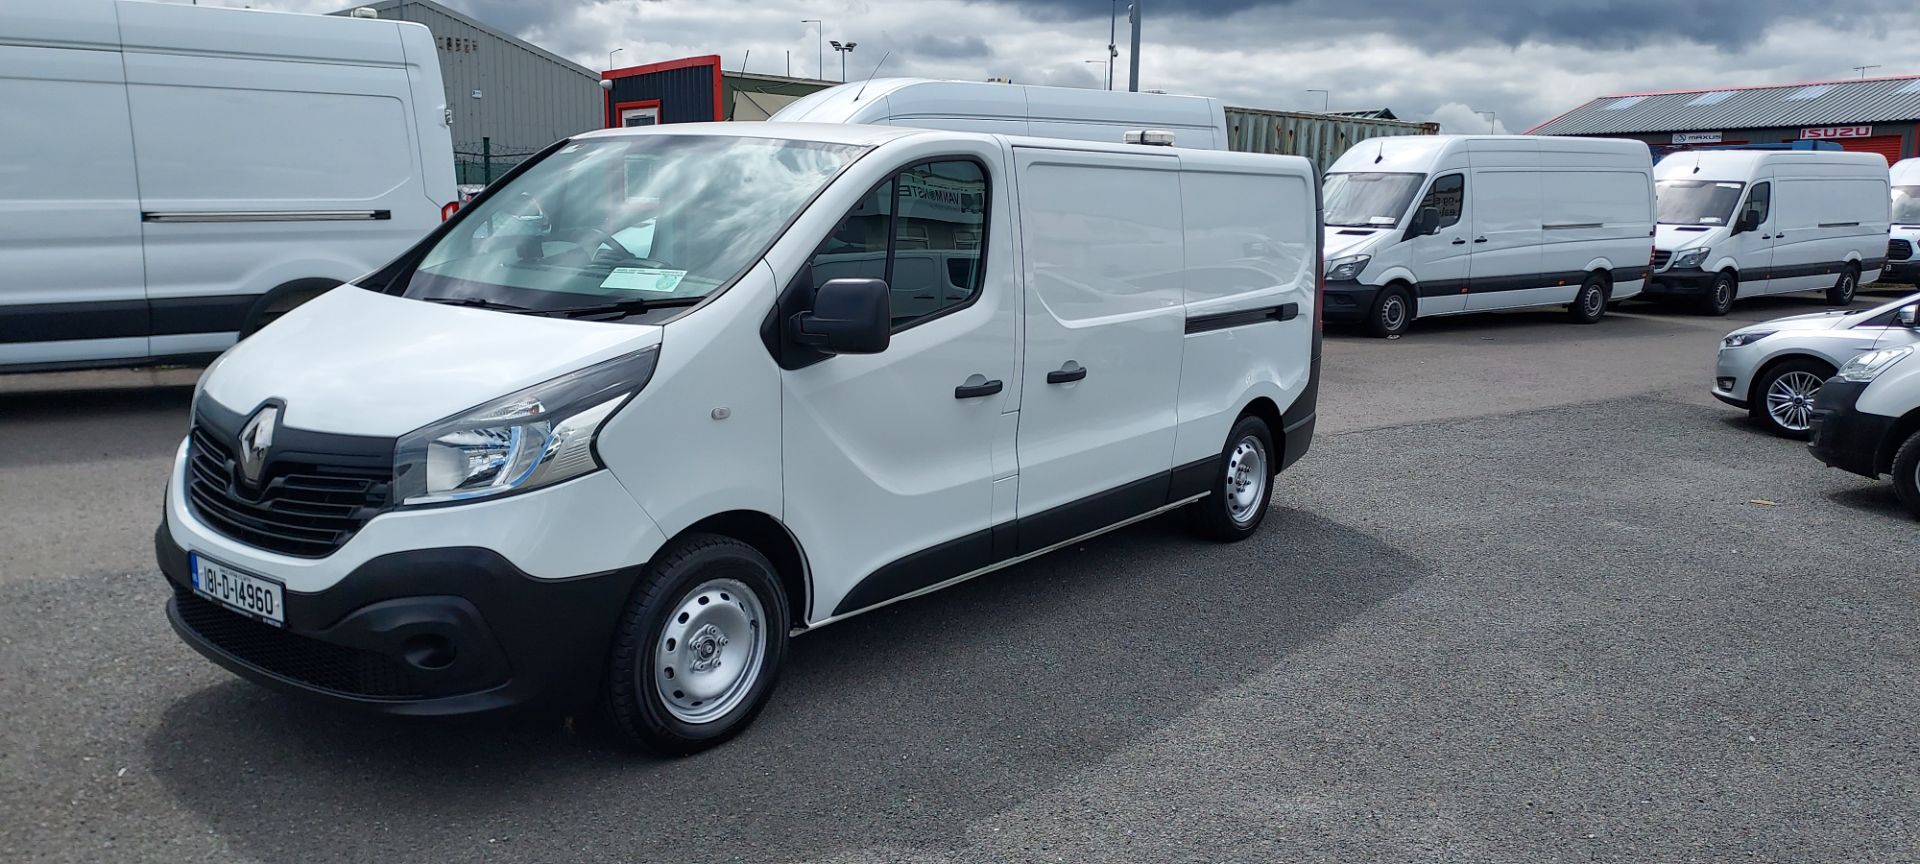 2018 Renault Trafic LL29 DCI 120 Business 3DR (181D14960) Image 3